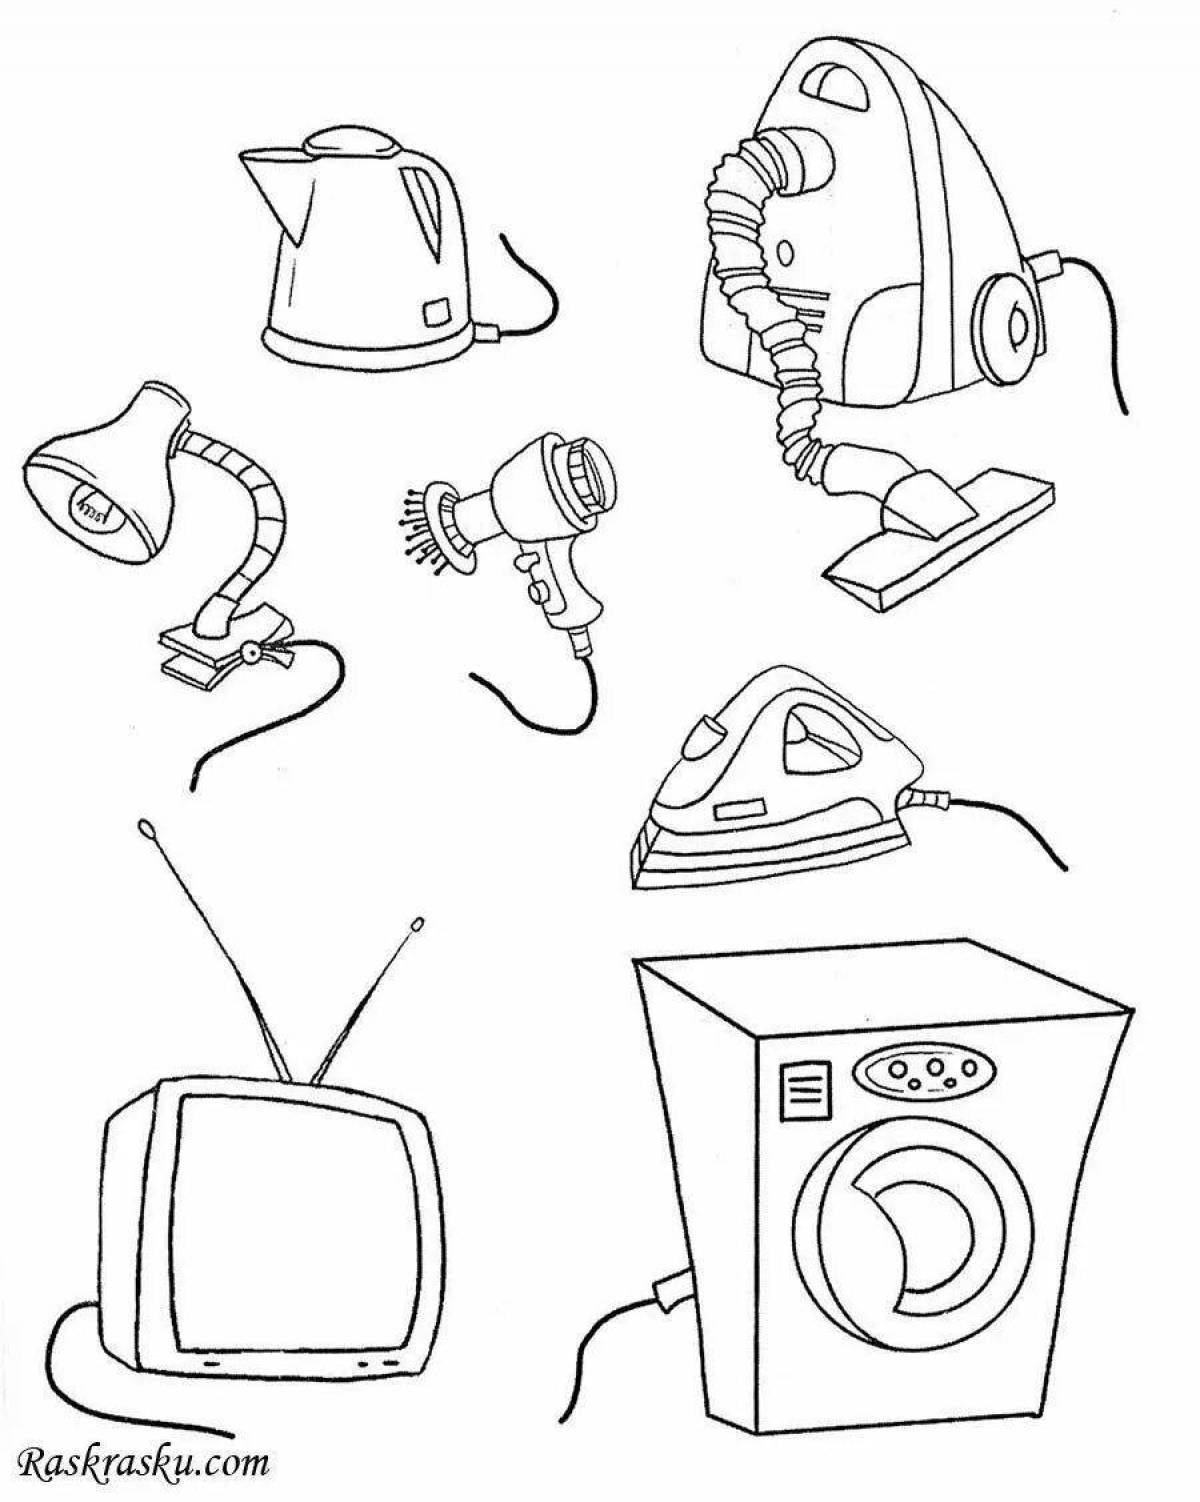 Coloring household appliances for kids 2-3